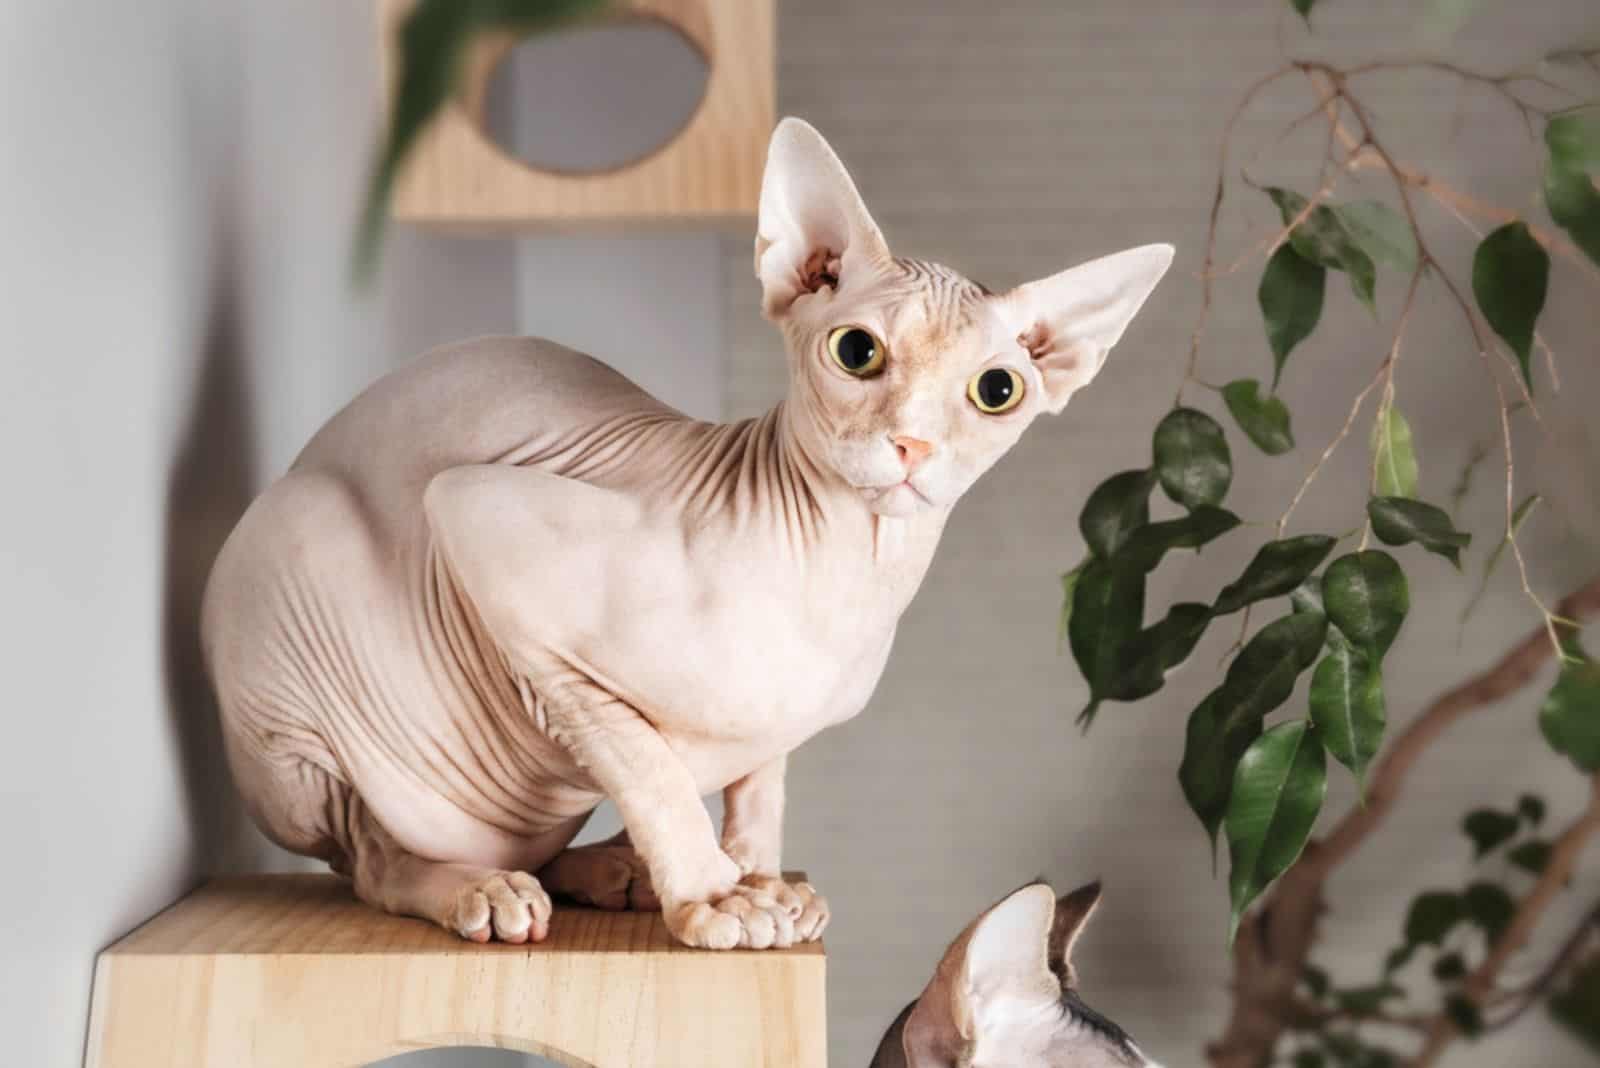 Sphynx cat looking at camera while sitting on floating wall shelf